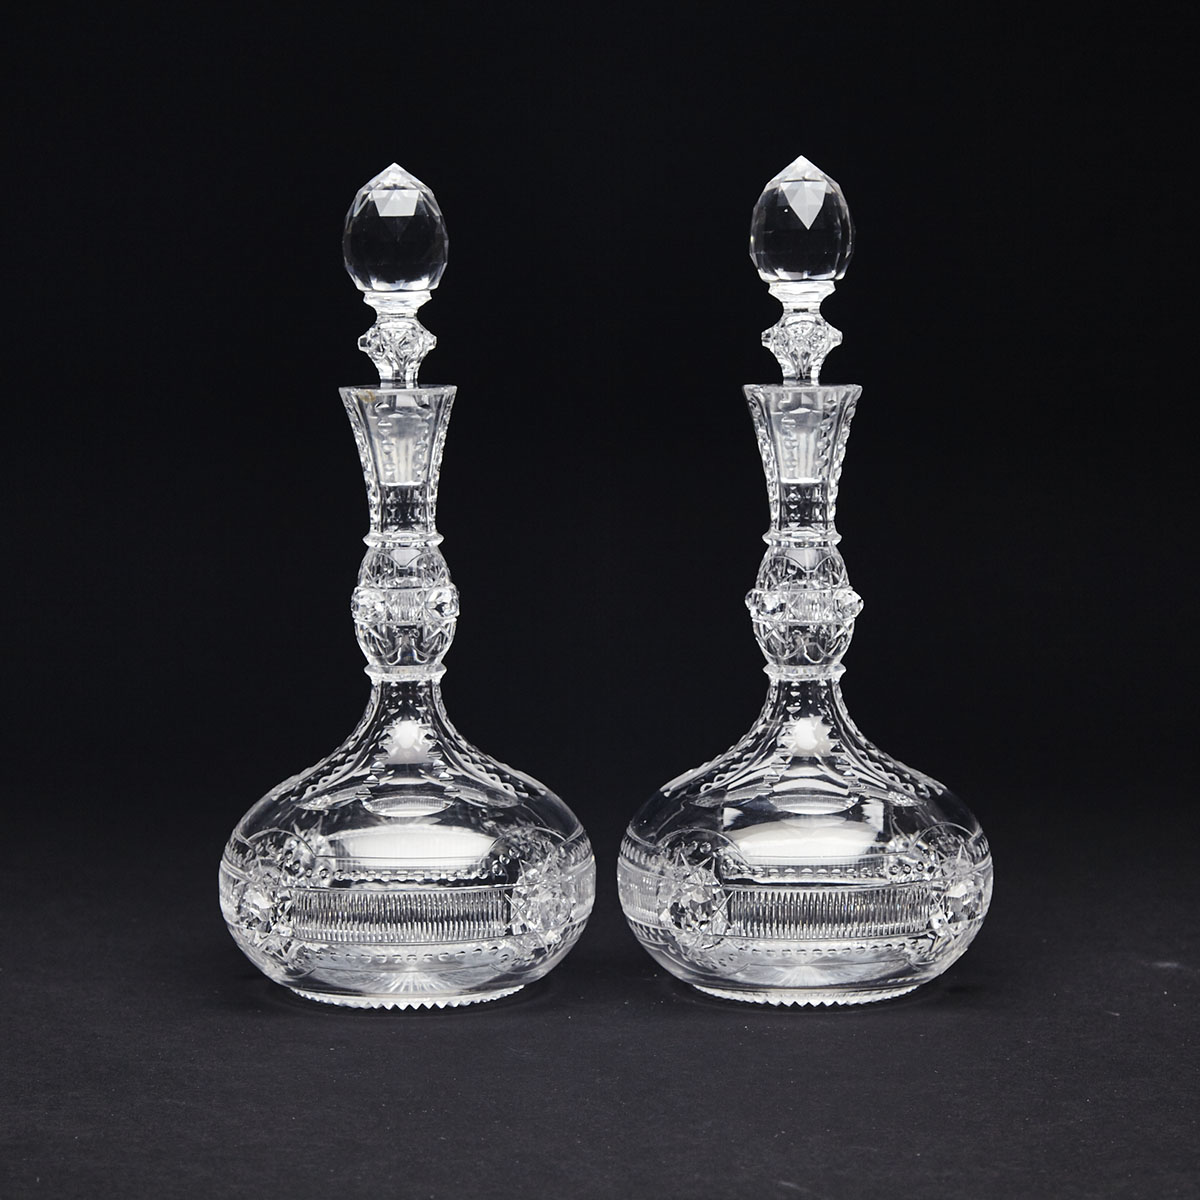 Pair of English Cut Glass Decanters, c.1865